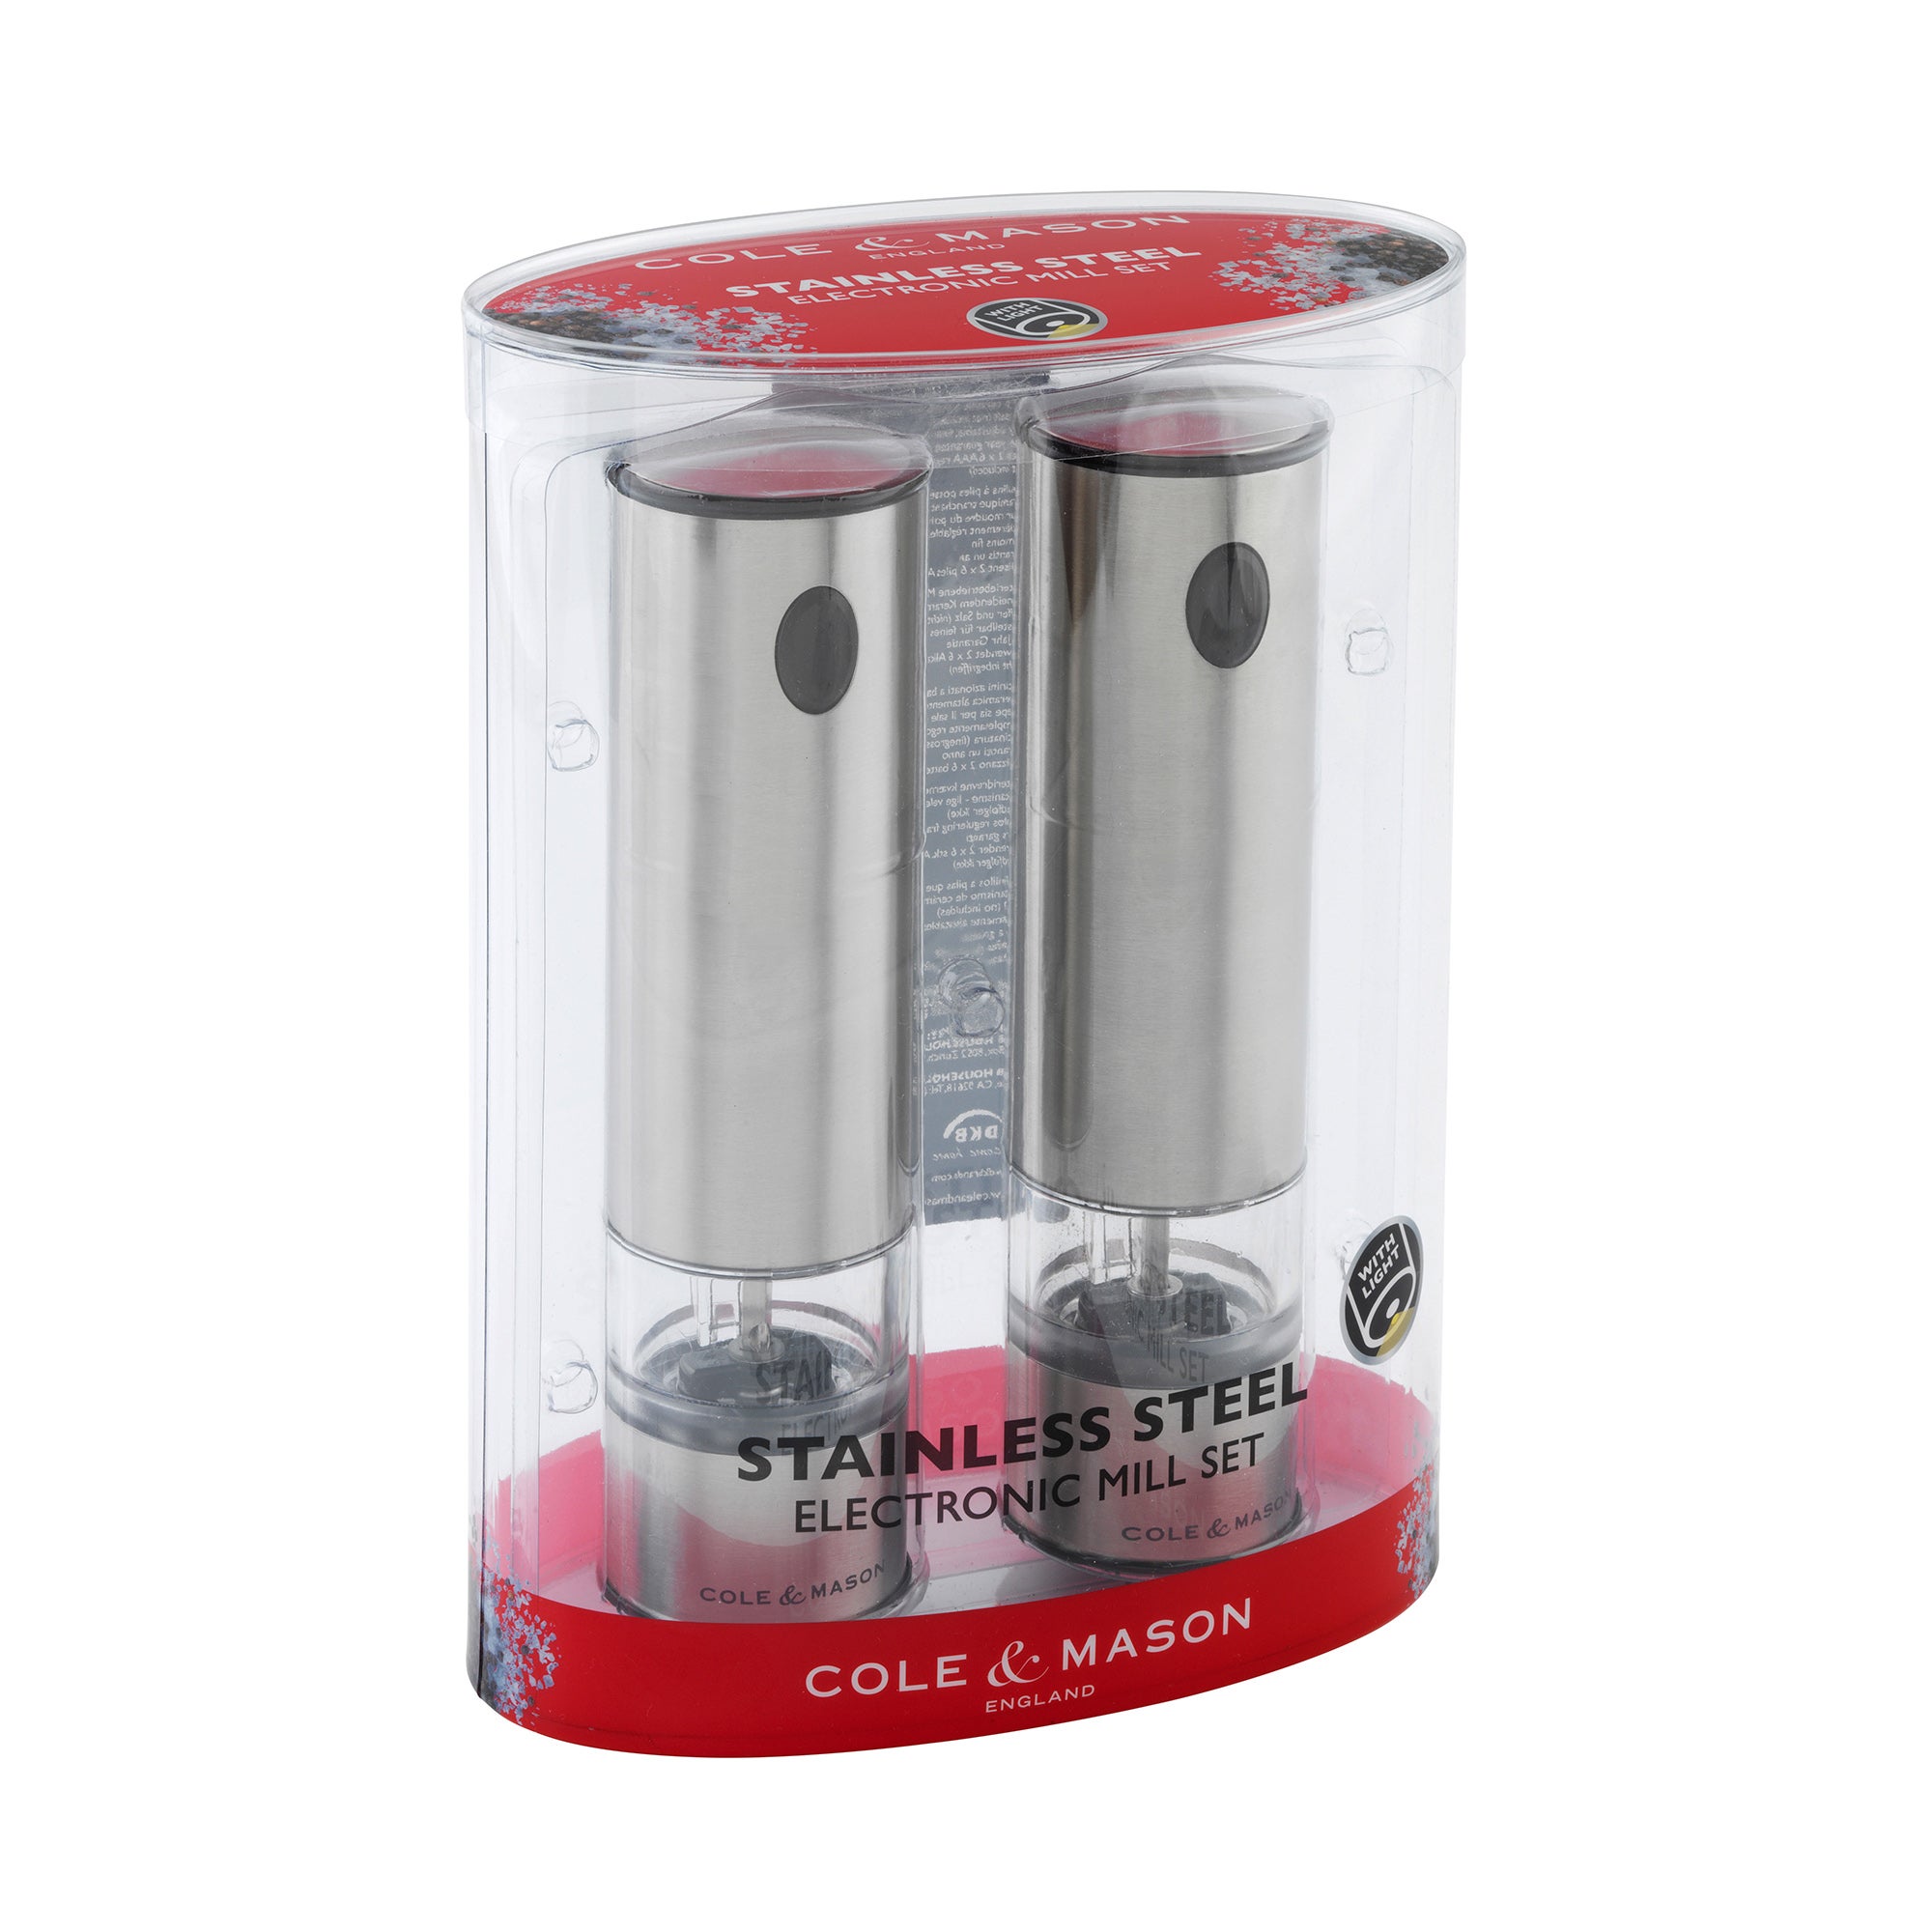 Cole & Mason 8 Stainless Steel Electronic Salt and Pepper Mill